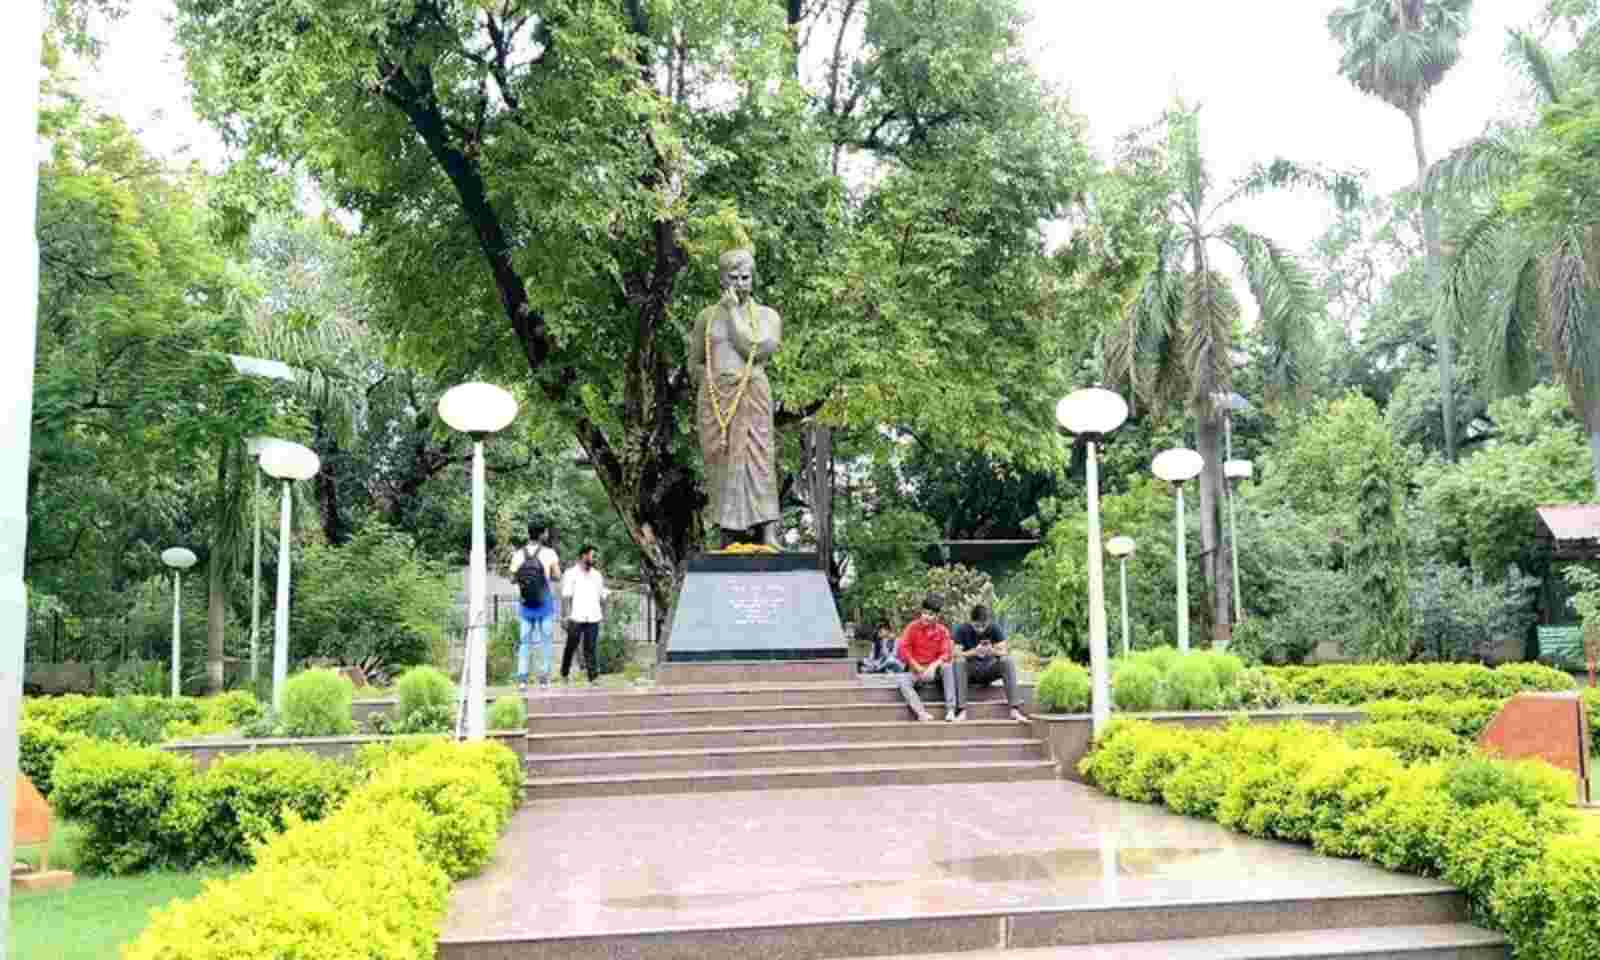 Remove All Encroachment Including Mosque, Mazar In Chandrashekhar Azad Park Within 3 Days: Allahabad HC To UP Govt